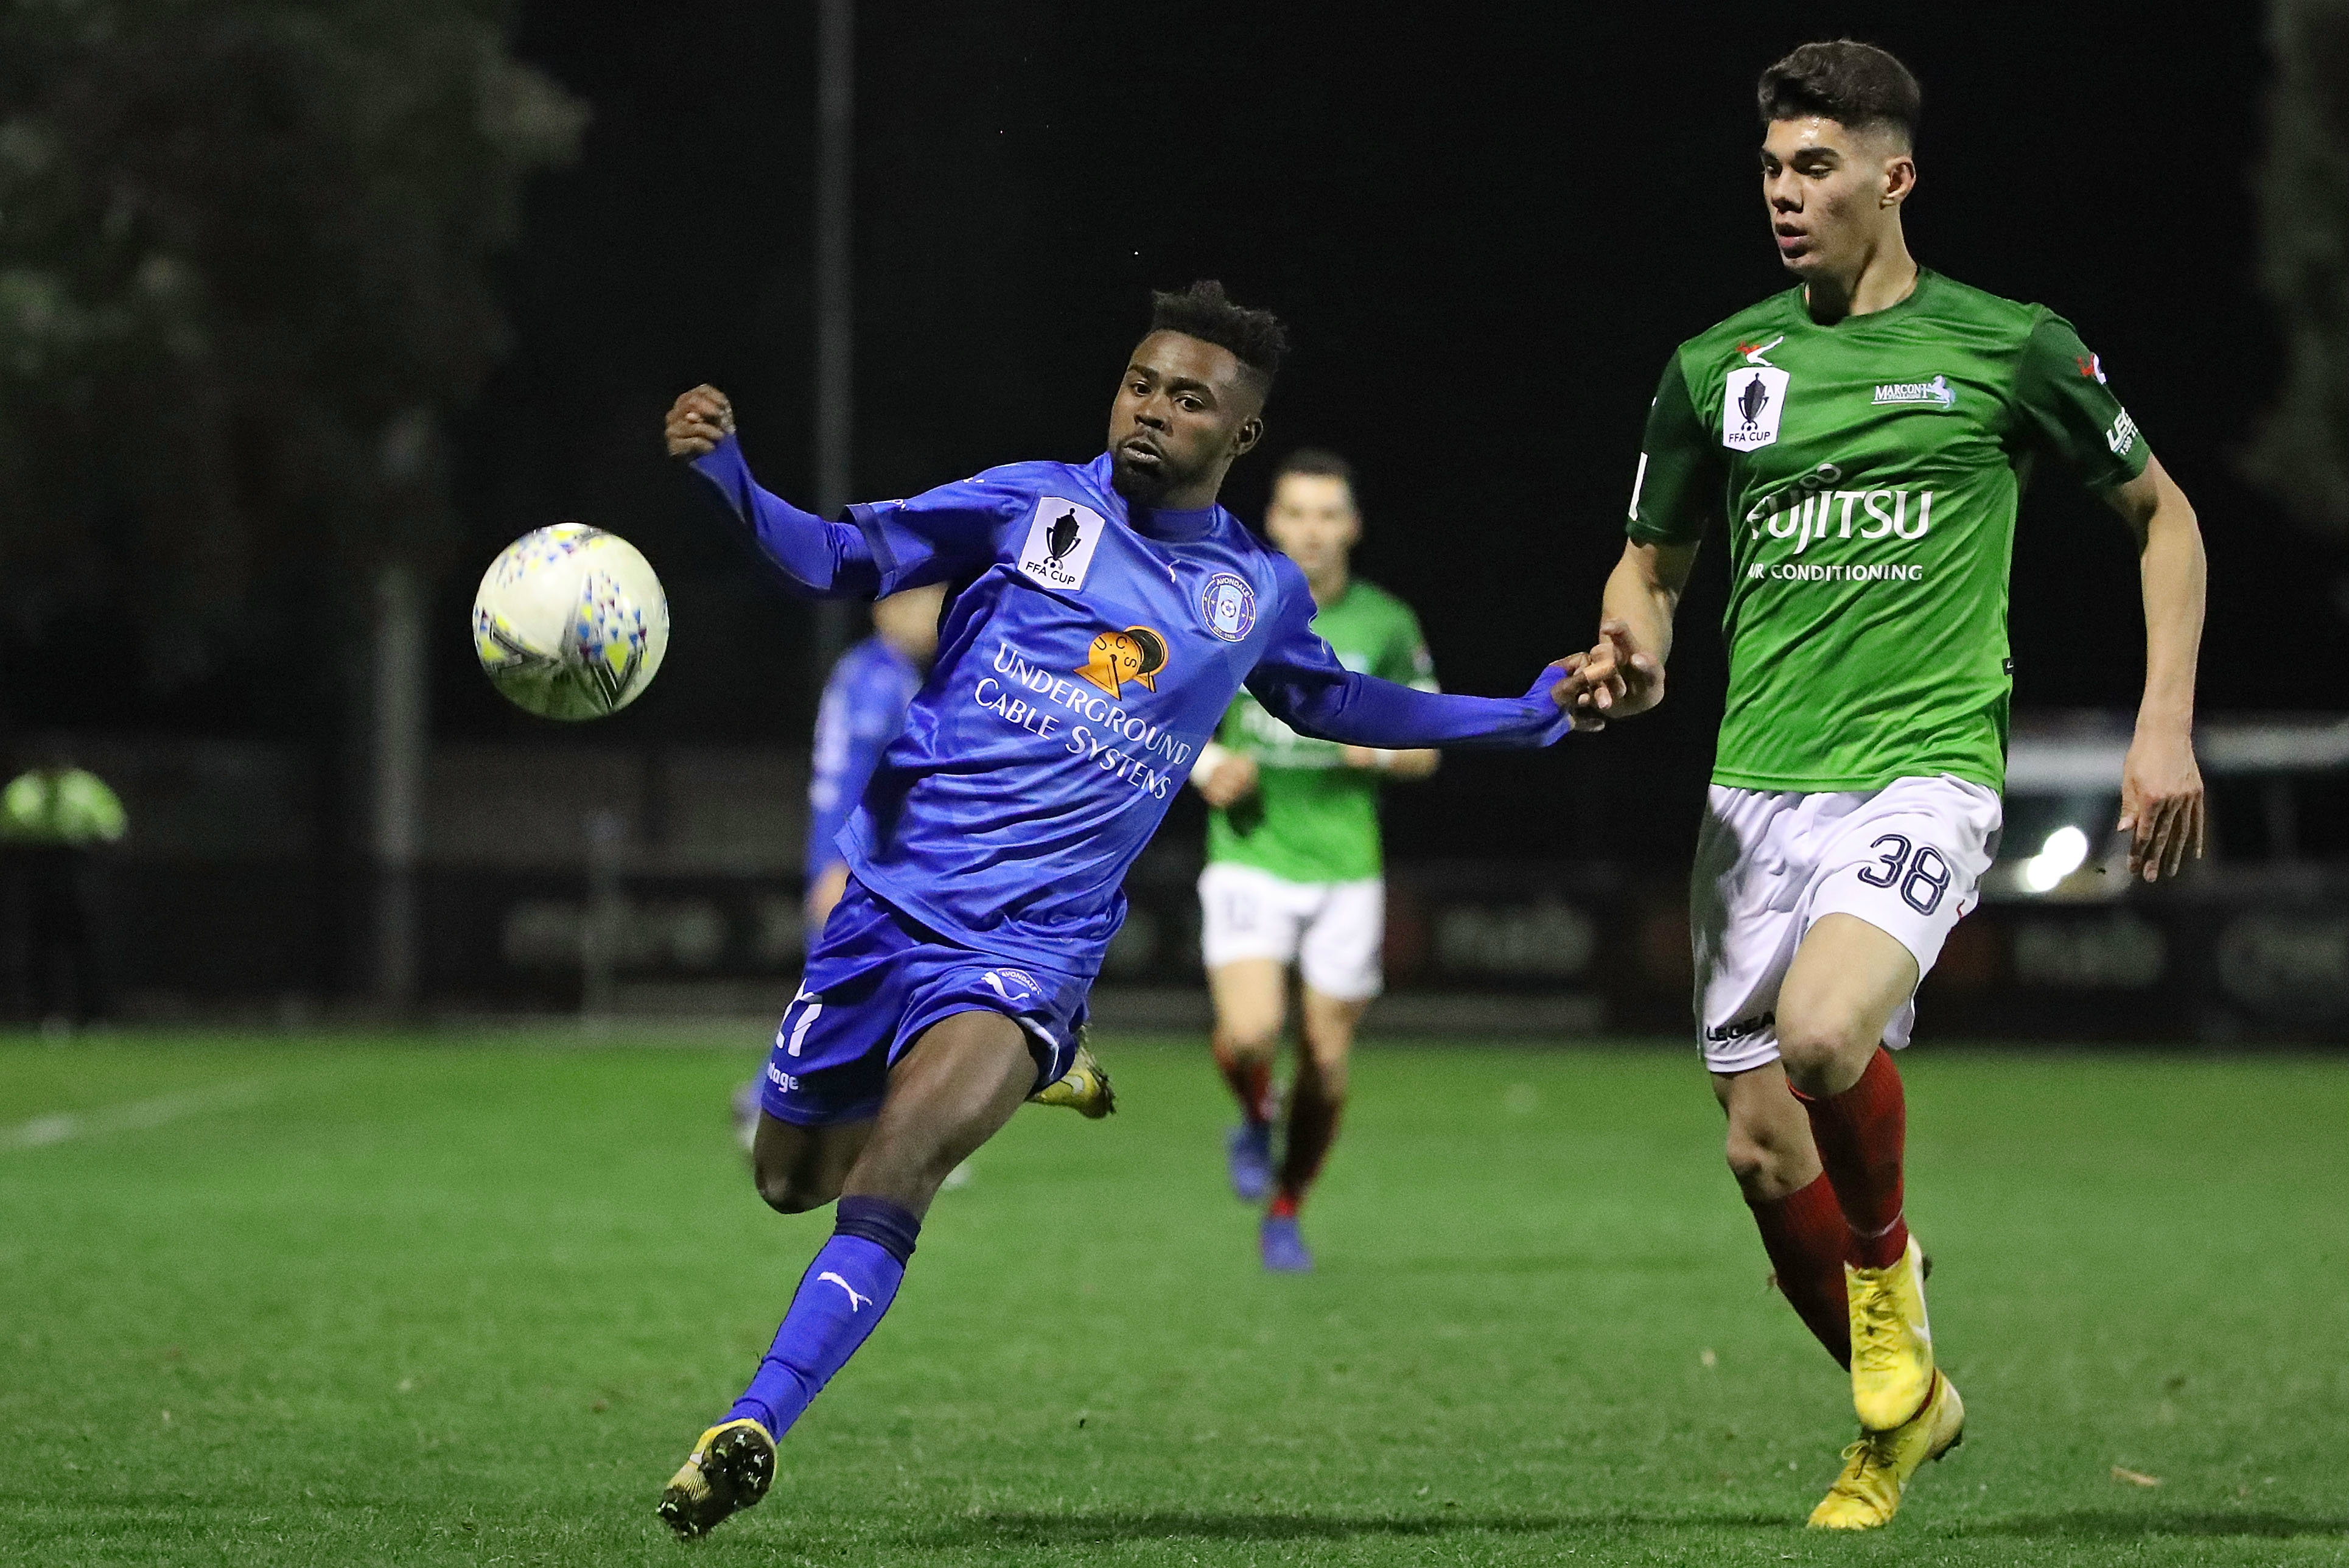 Elvis Kamsoba in action for Avondale in last year's FFA Cup